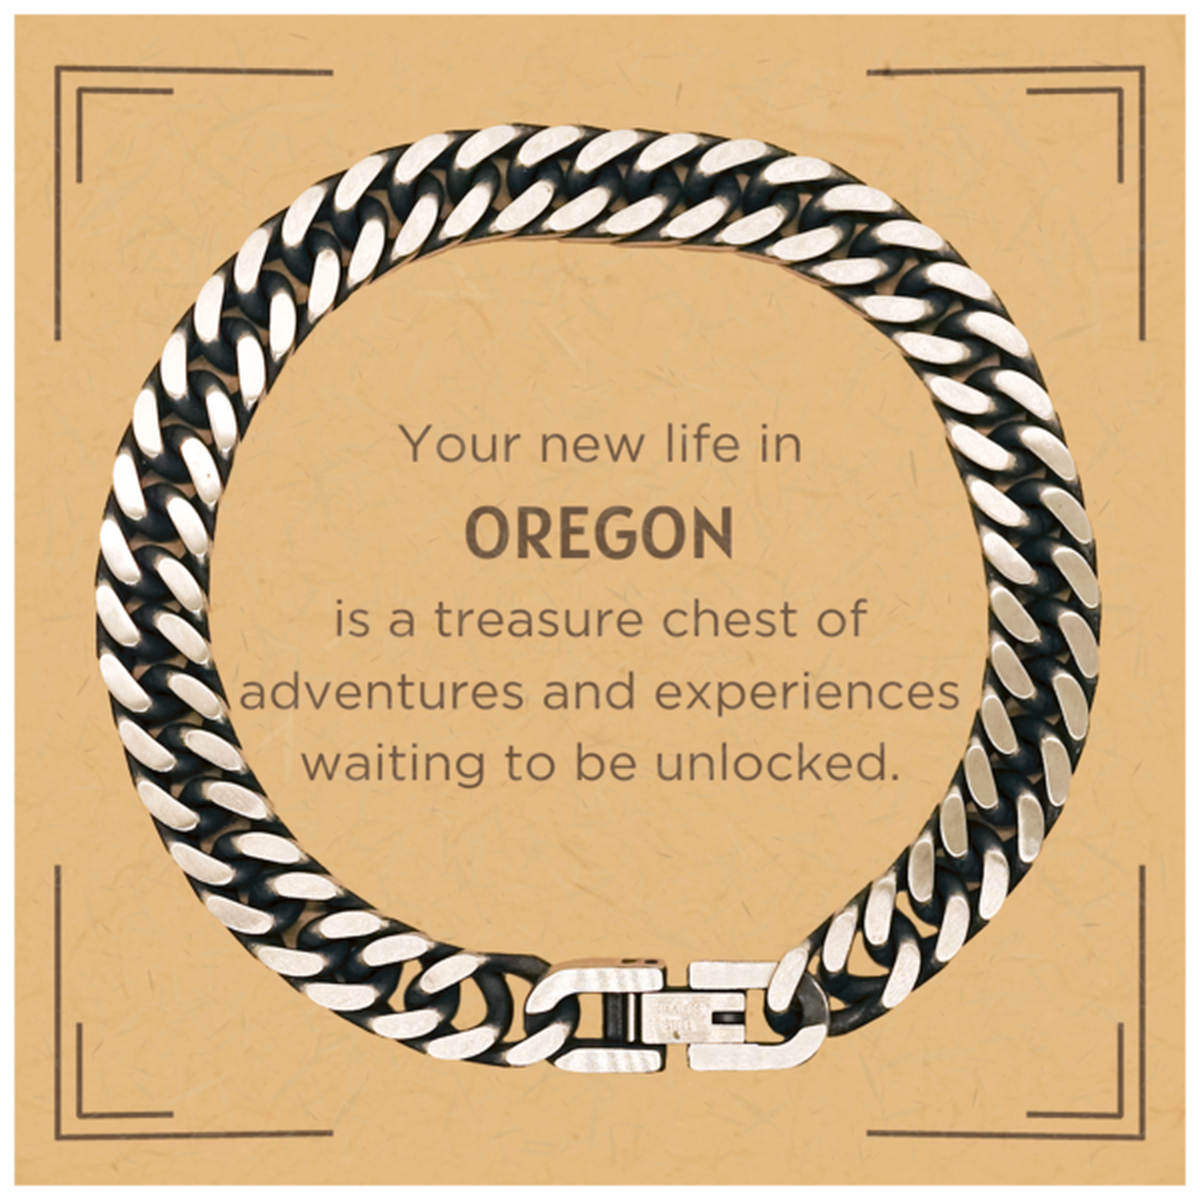 Moving to Oregon Gifts, Your new life in Oregon, Long Distance Oregon Christmas Cuban Link Chain Bracelet For Men, Women, Friends, Coworkers